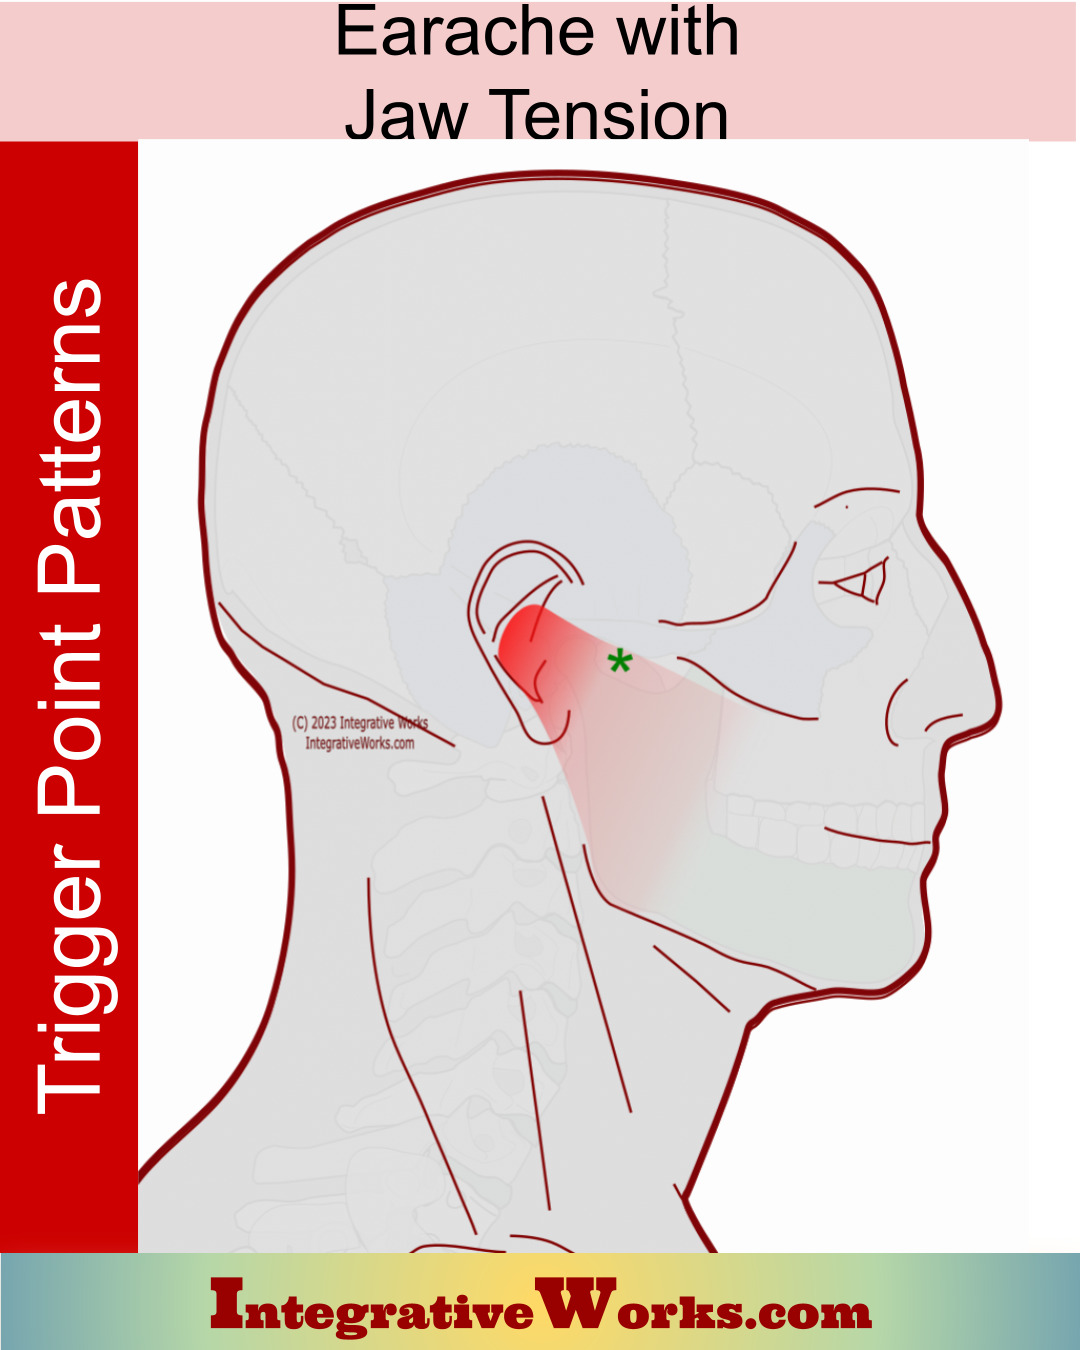 Earache with Jaw tension